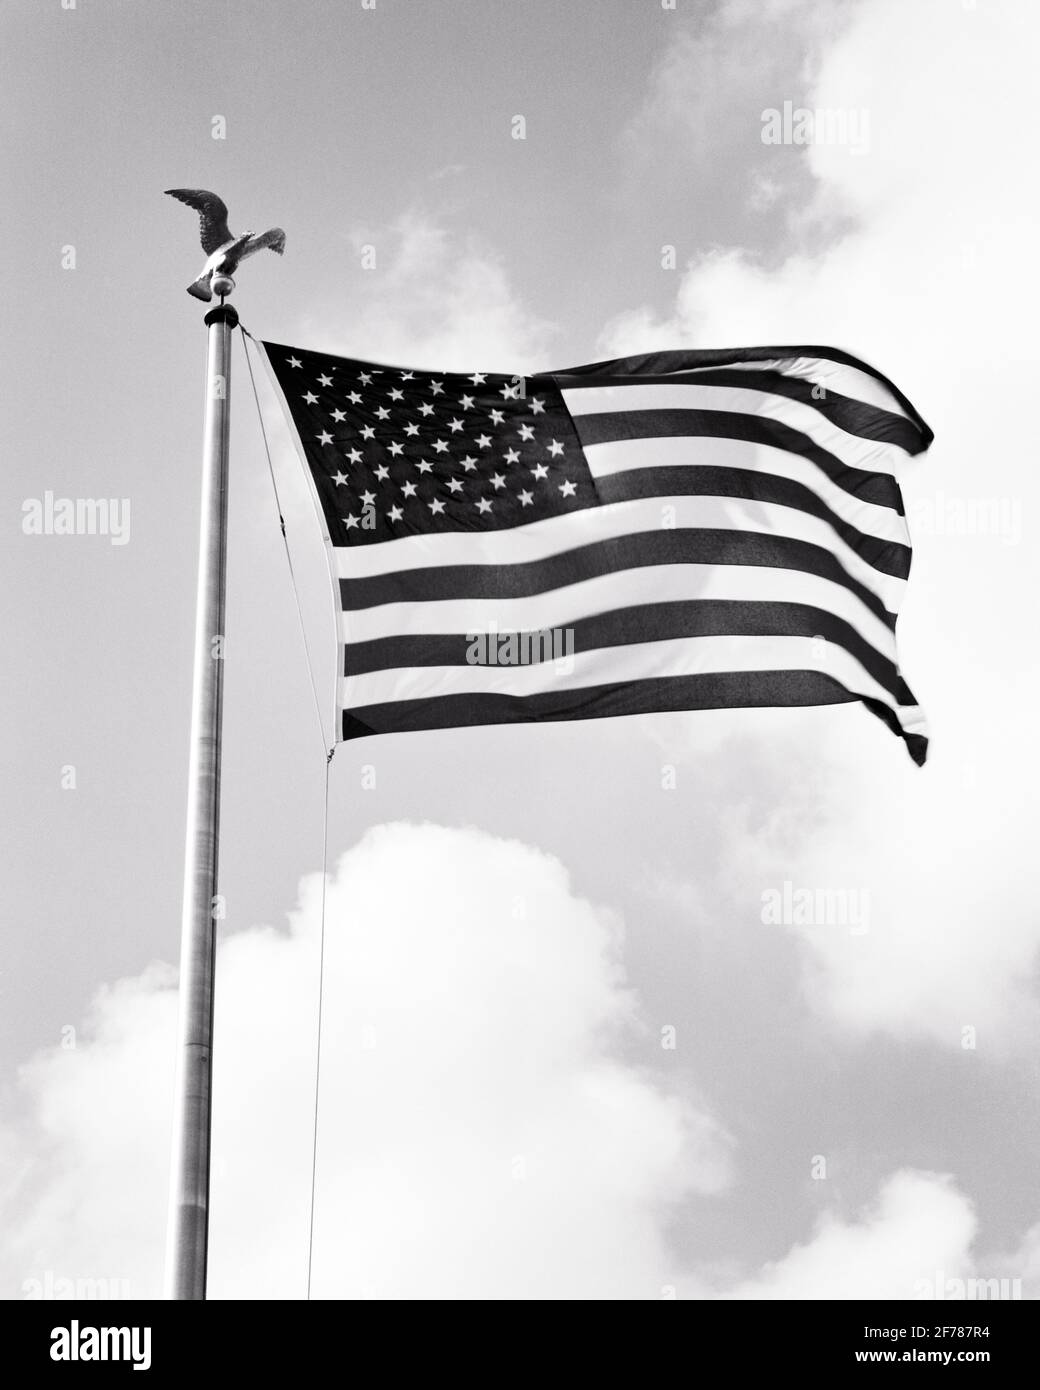 1960s 50 STAR AMERICAN FLAG ON FLAGPOLE WITH EAGLE MOTIF ON TOP - h7564 HAR001 HARS REPRESENTATION Stock Photo